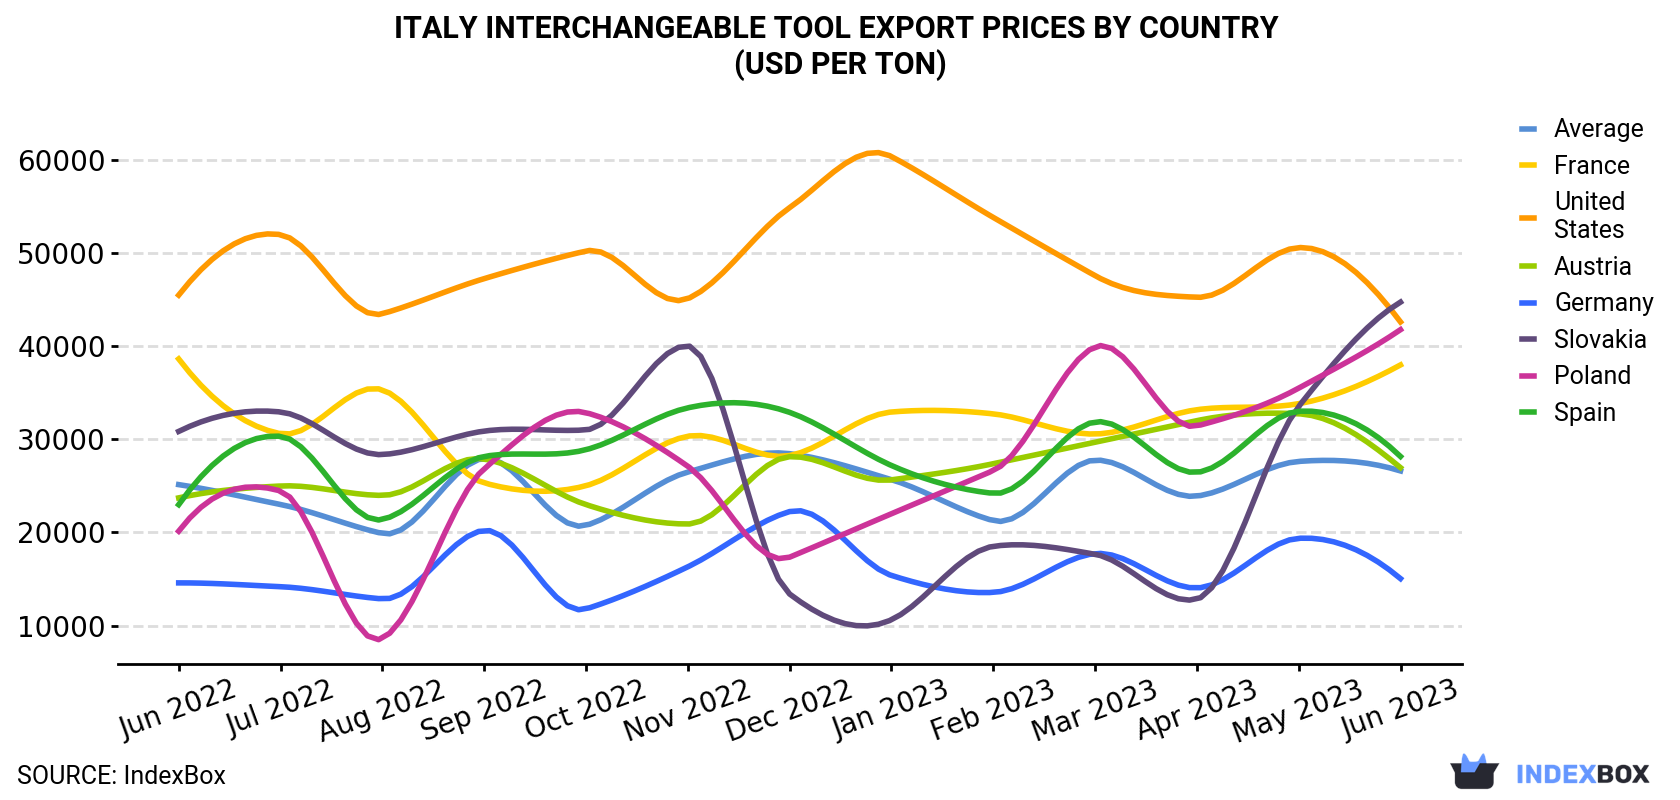 Italy Interchangeable Tool Export Prices By Country (USD Per Ton)